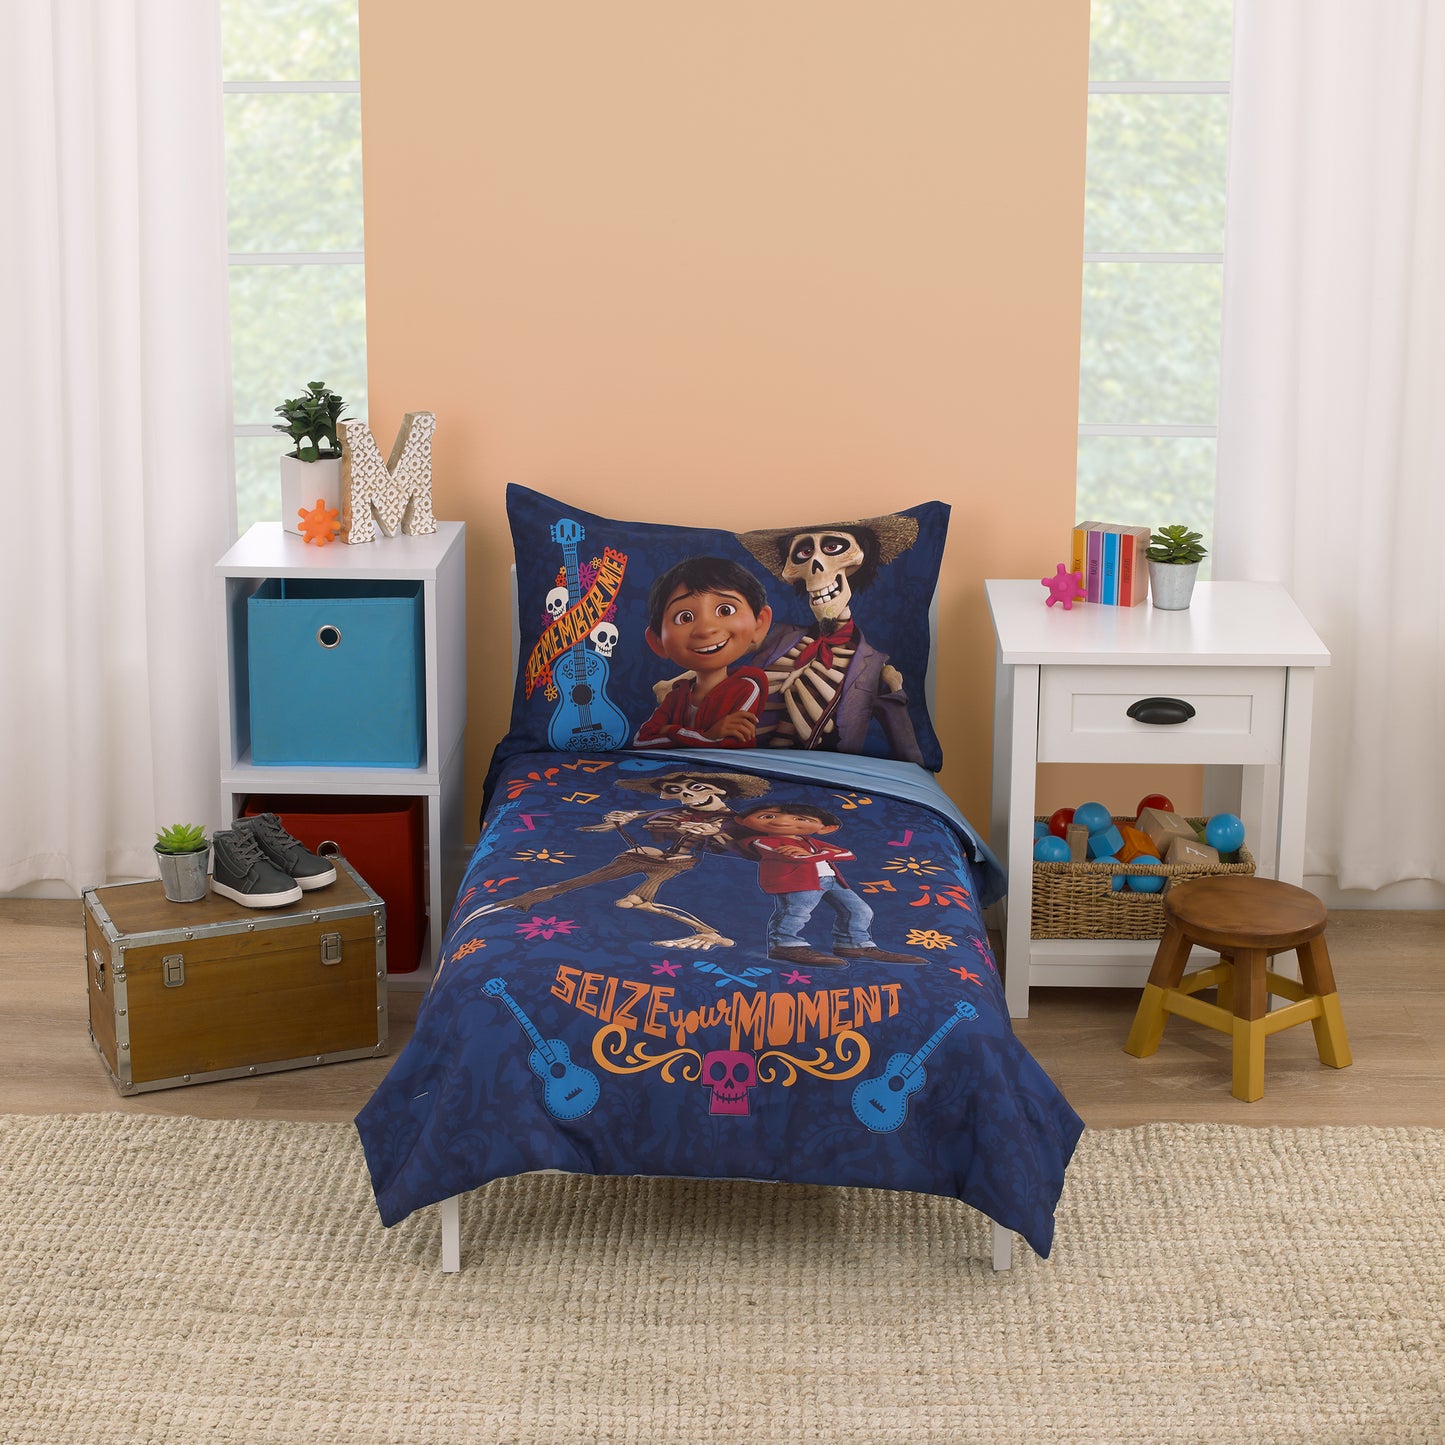 Disney Coco Navy, Orange, and Light Blue, Seize Your Moment 4 Piece Toddler Bed Set - Comforter, Fitted Bottom Sheet, Flat Top Sheet, and Reversible Pillowcase